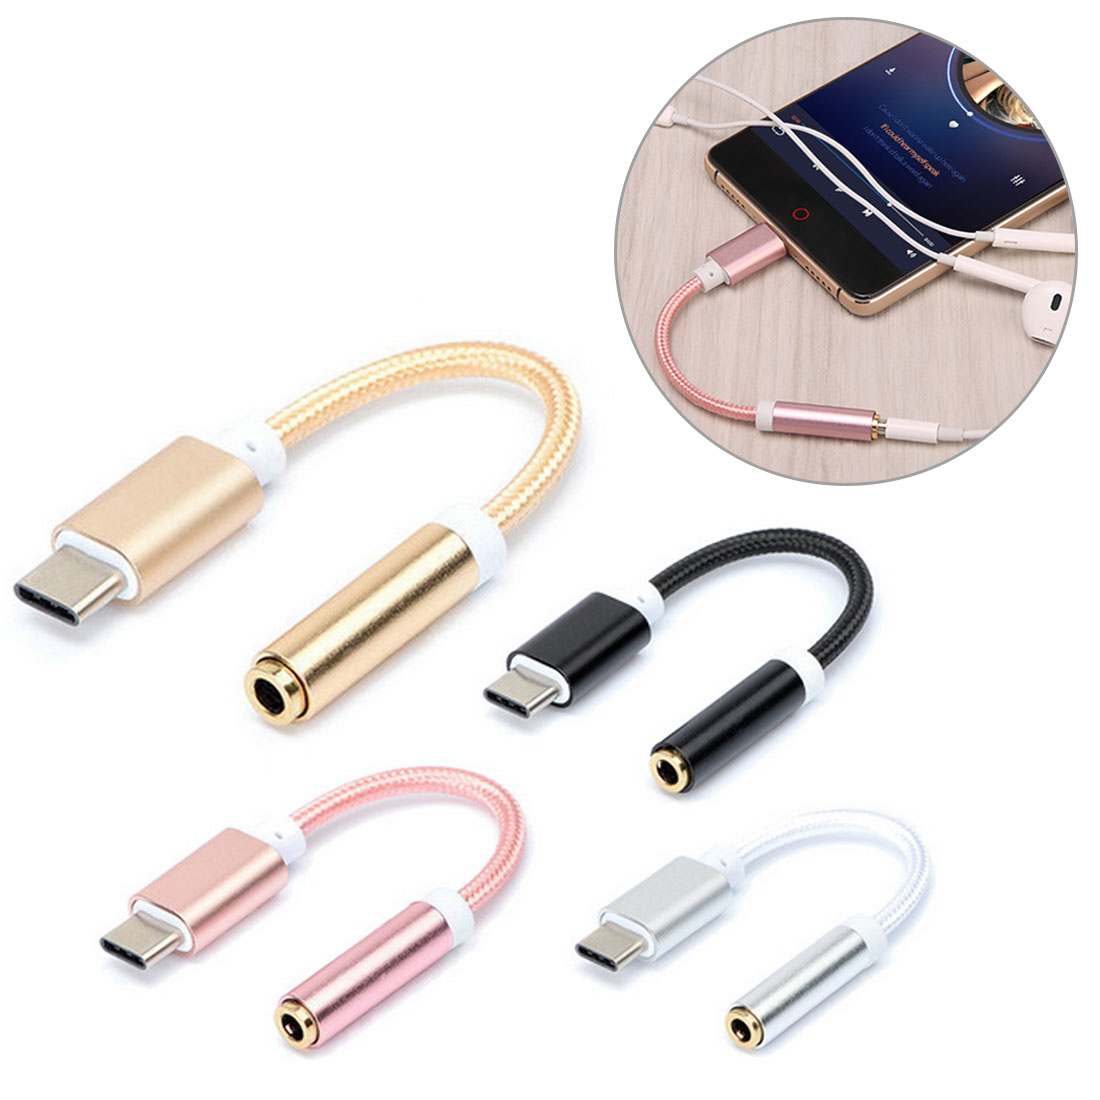 

10cm AUX Audio Cable USB Type C to 3.5mm Earphone Adapter Type-C to 3.5mm Headphone